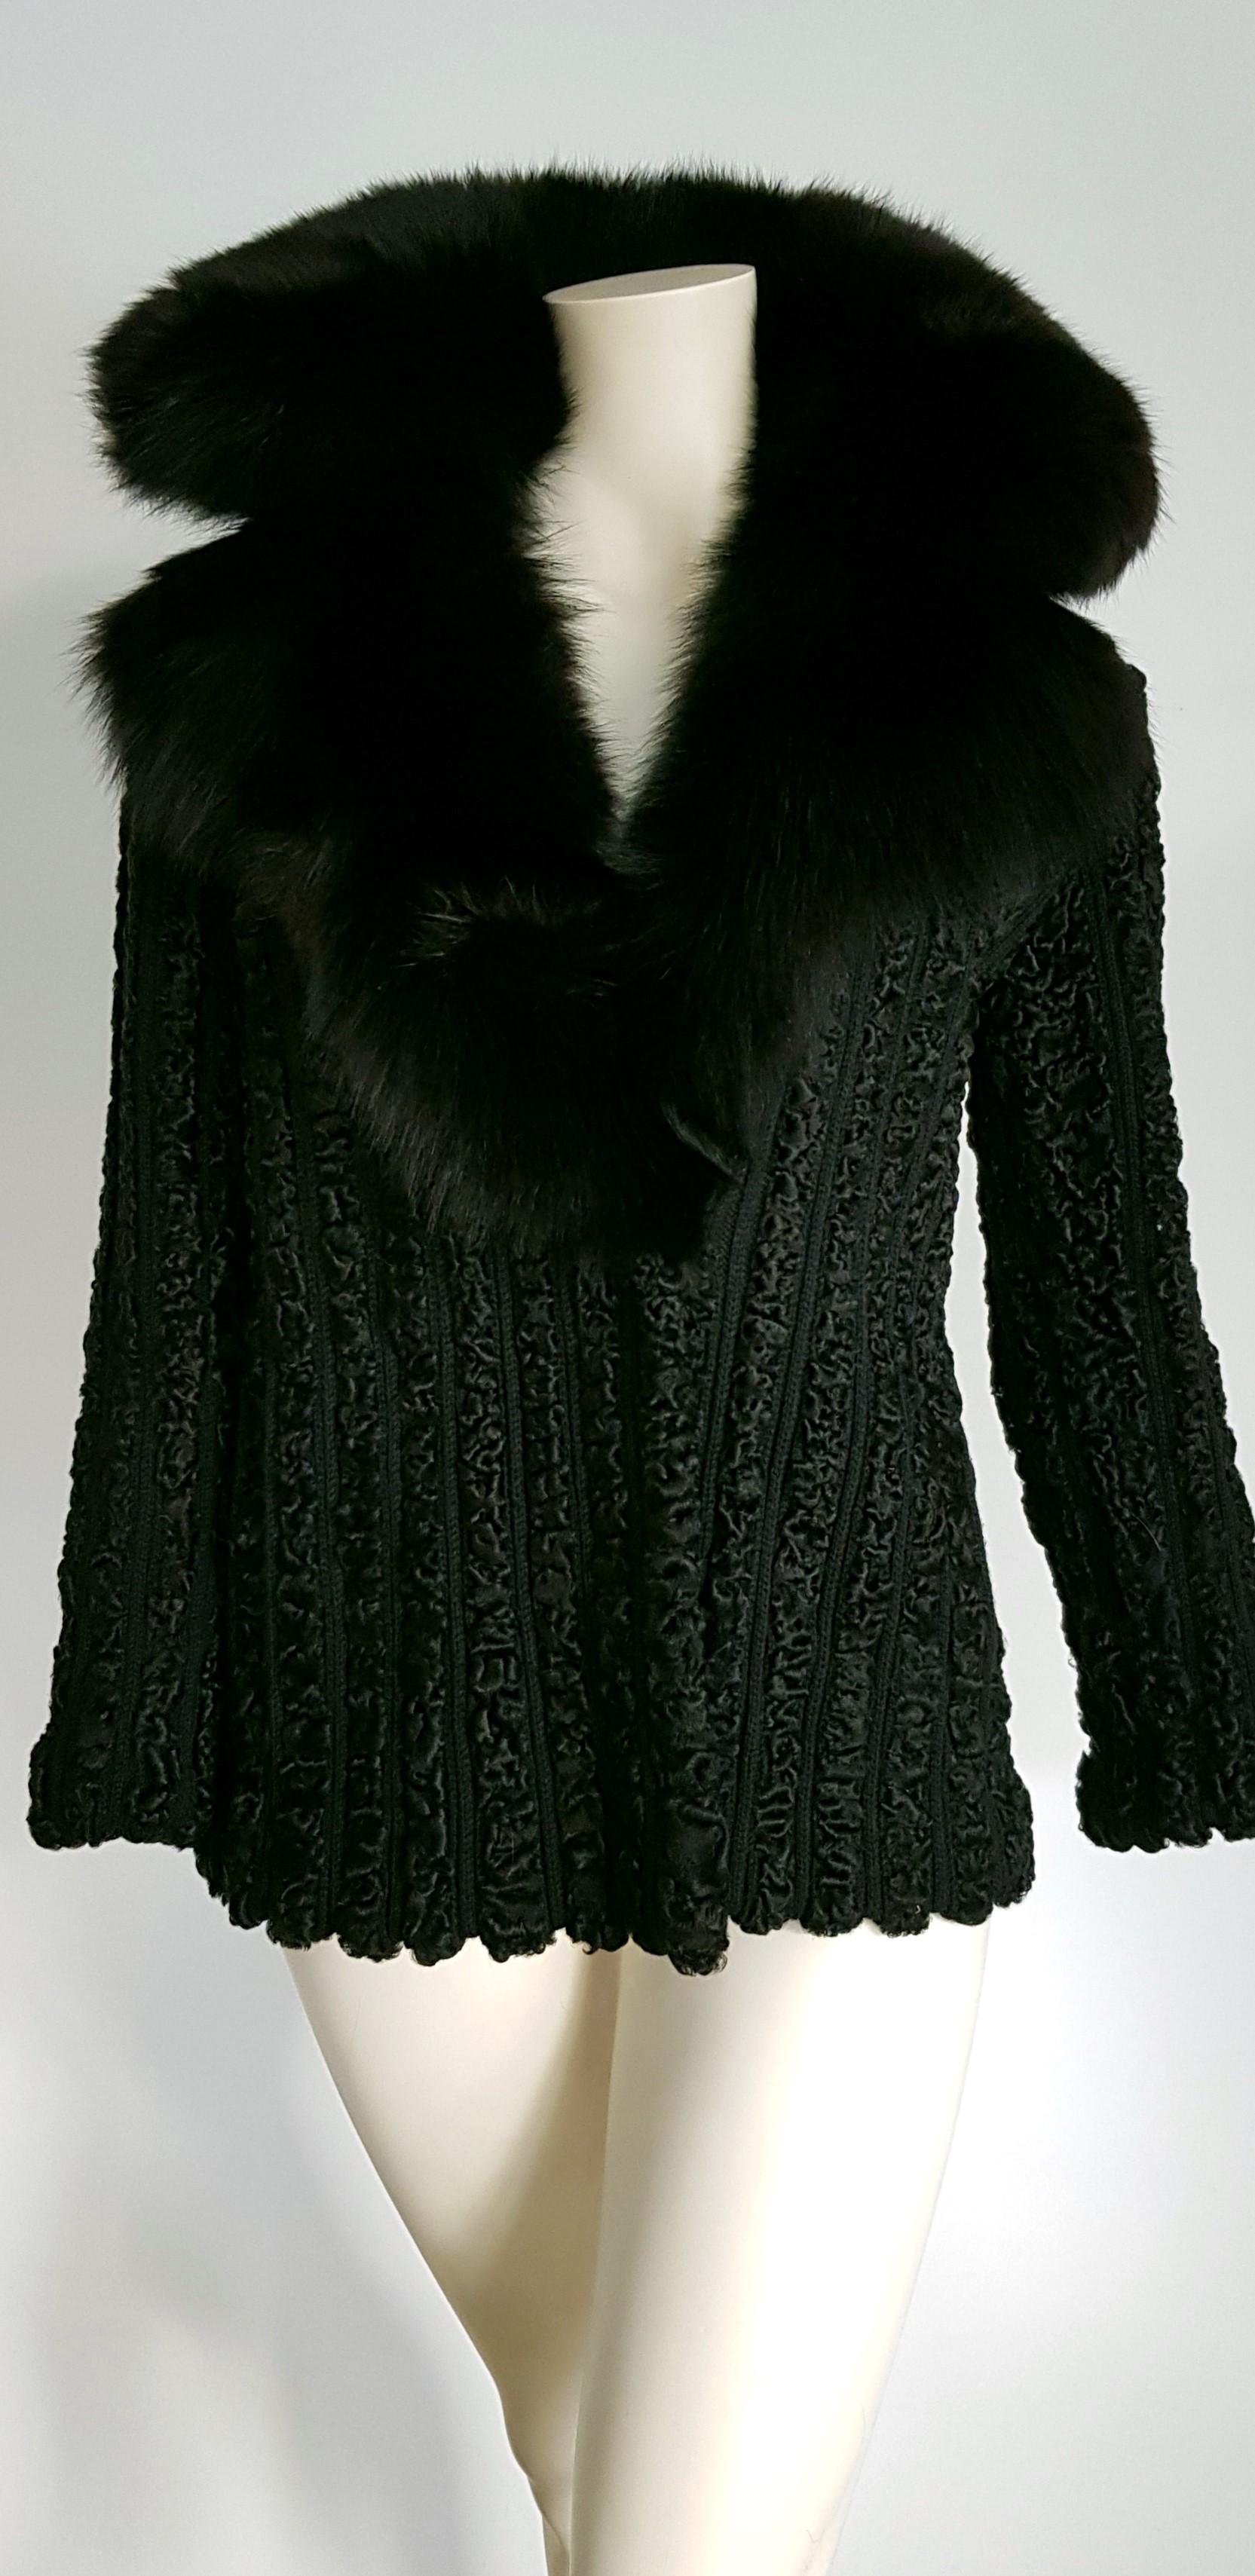 FENDI wild Russian Karakul with Fox Collar Black Fur Jacket - Unworn, New.

SIZE: equivalent to about Small / Medium, please review approx measurements as follows in cm: lenght 75, chest underarm to underarm 54, waist circumference 102, shoulder